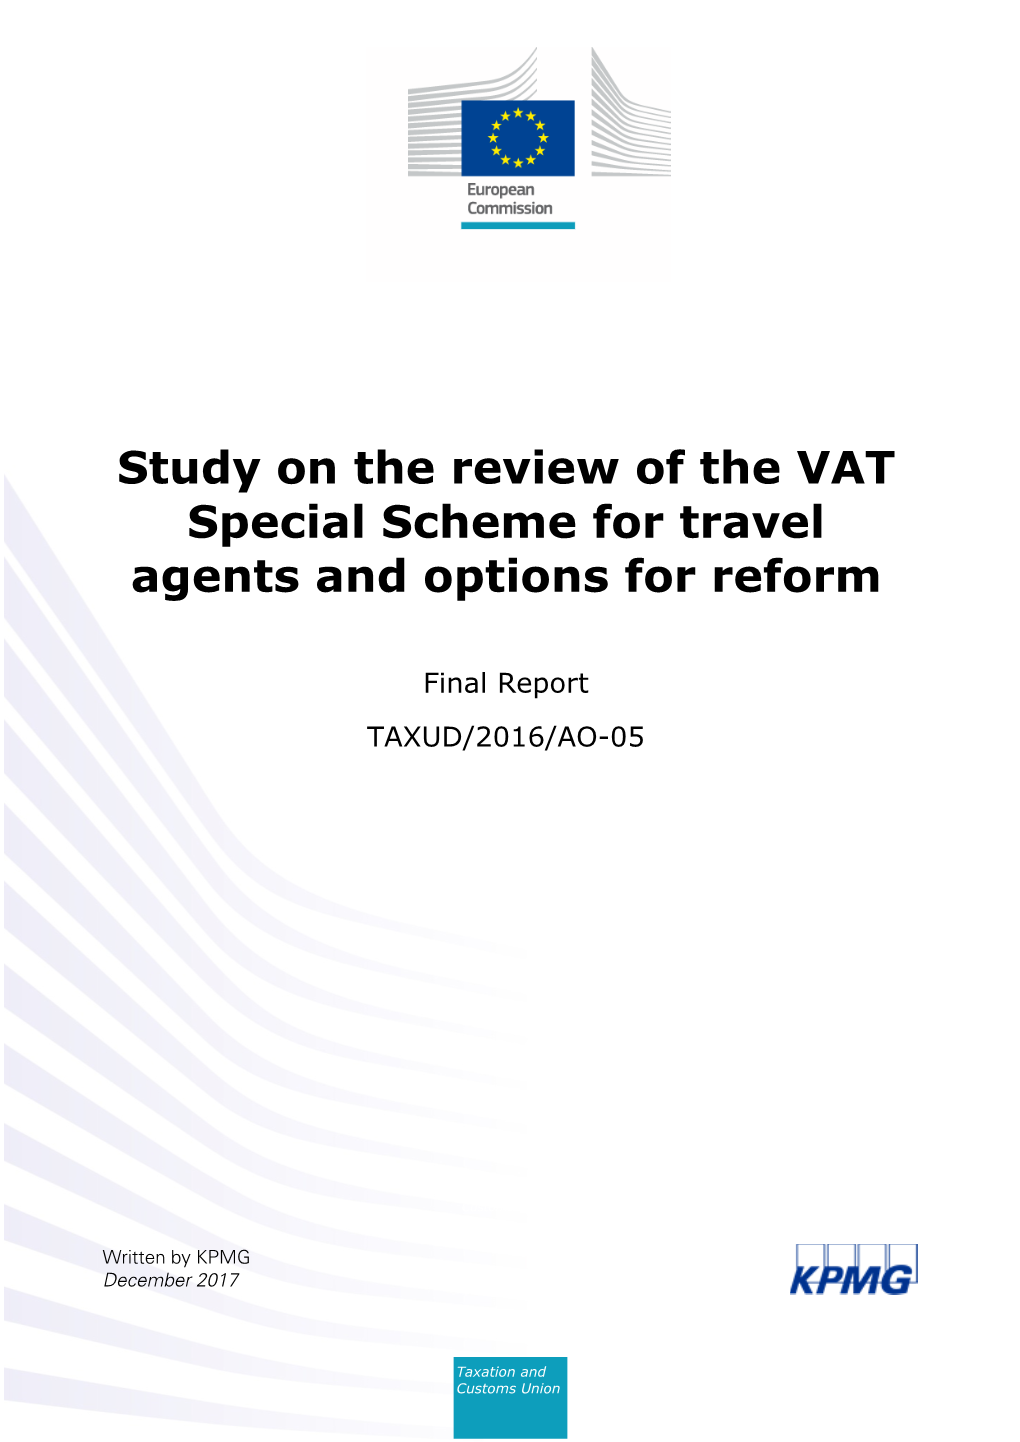 Study on the Review of the VAT Special Scheme for Travel Agents and Options for Reform